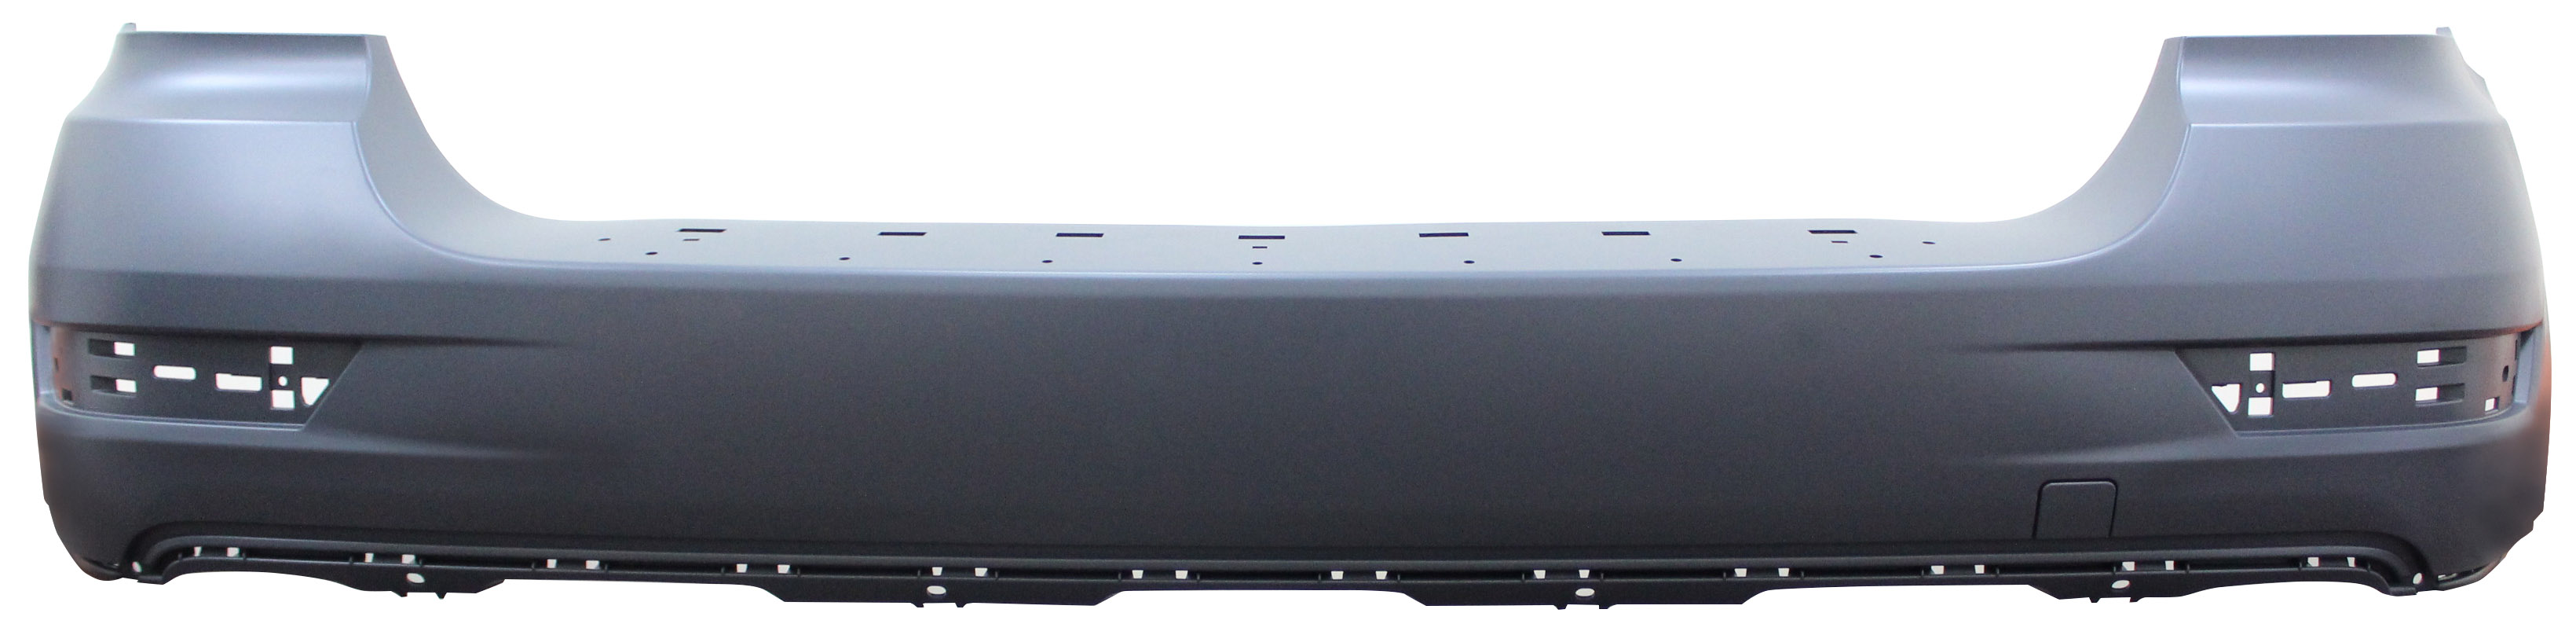 Aftermarket BUMPER COVERS for MERCEDES-BENZ - ML350, ML350,06-11,Rear bumper cover